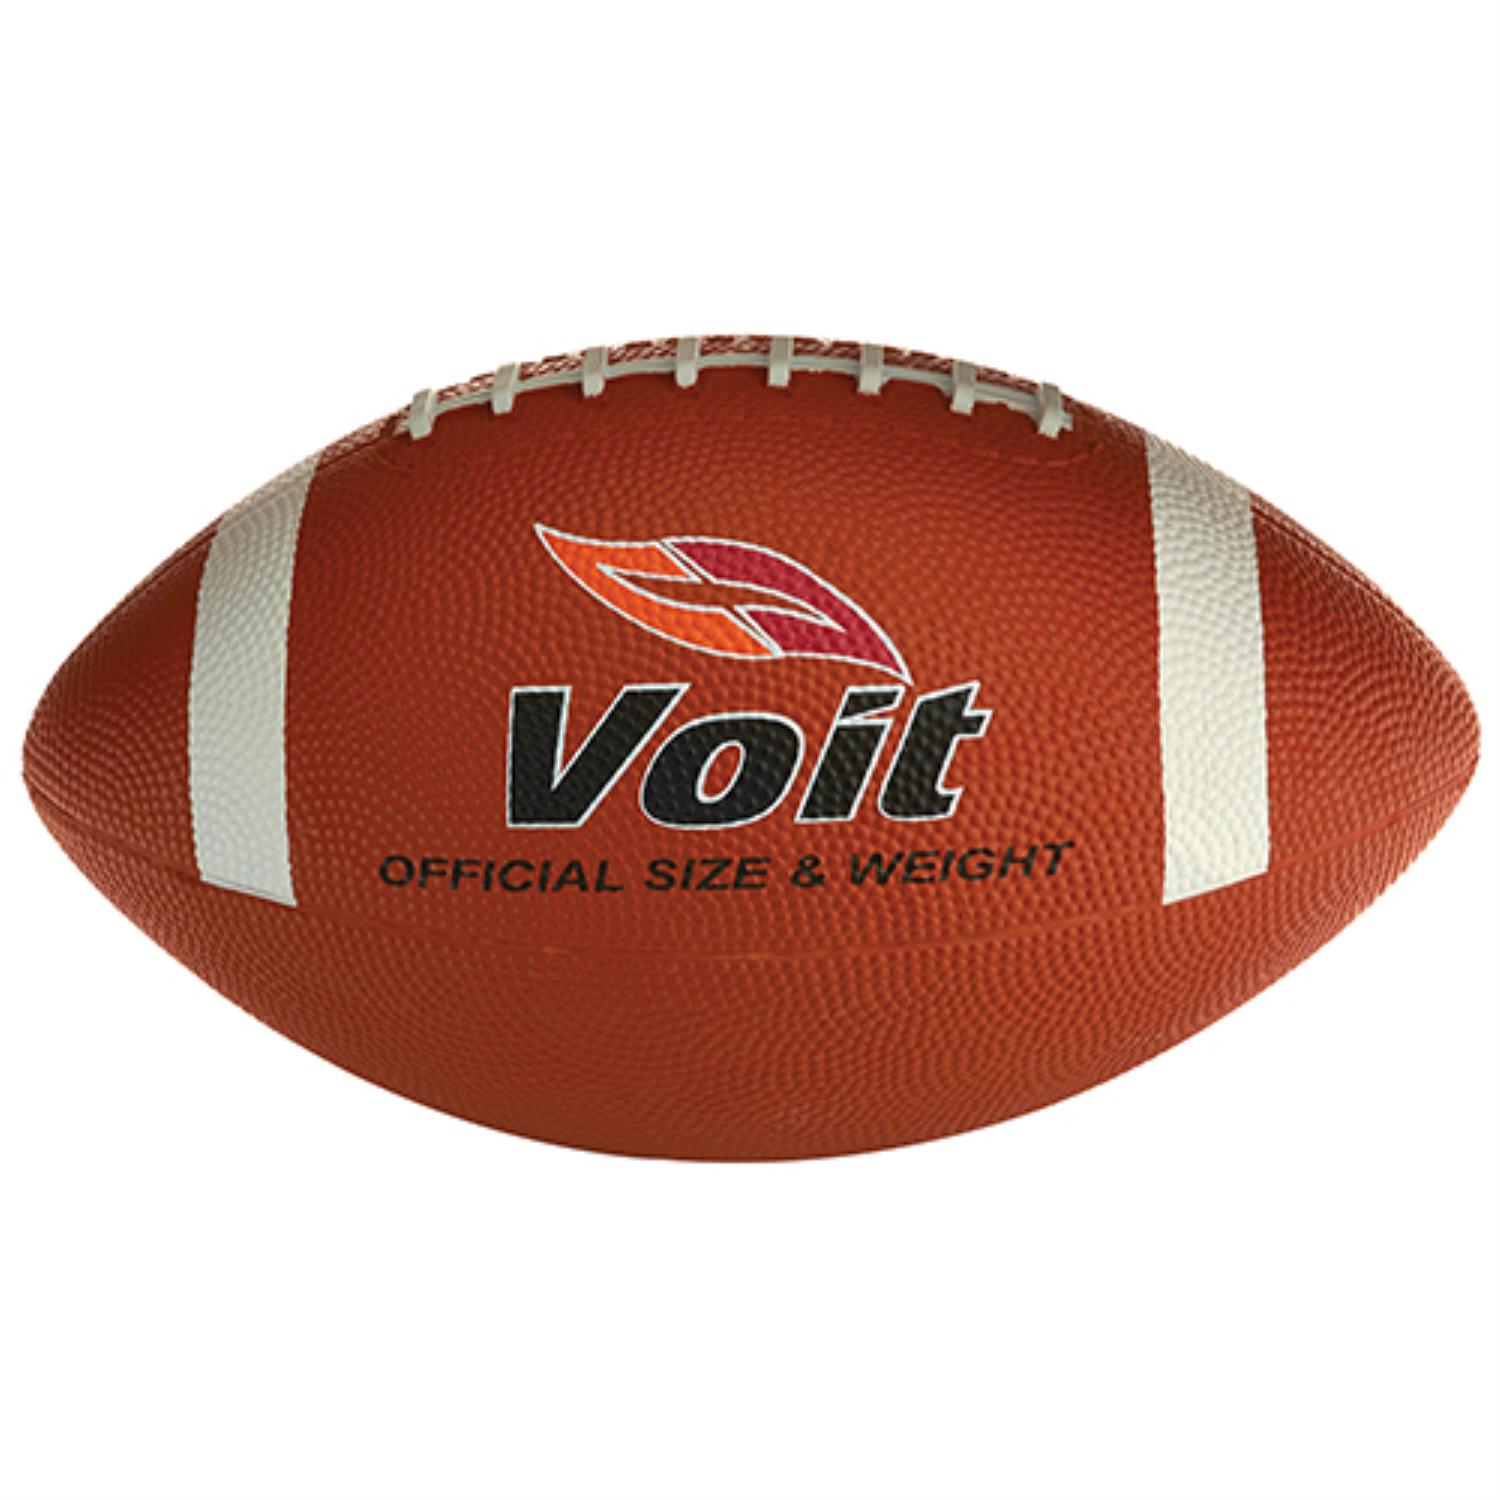 Athletic Connection Voit Rubber Football VCF9SHXX